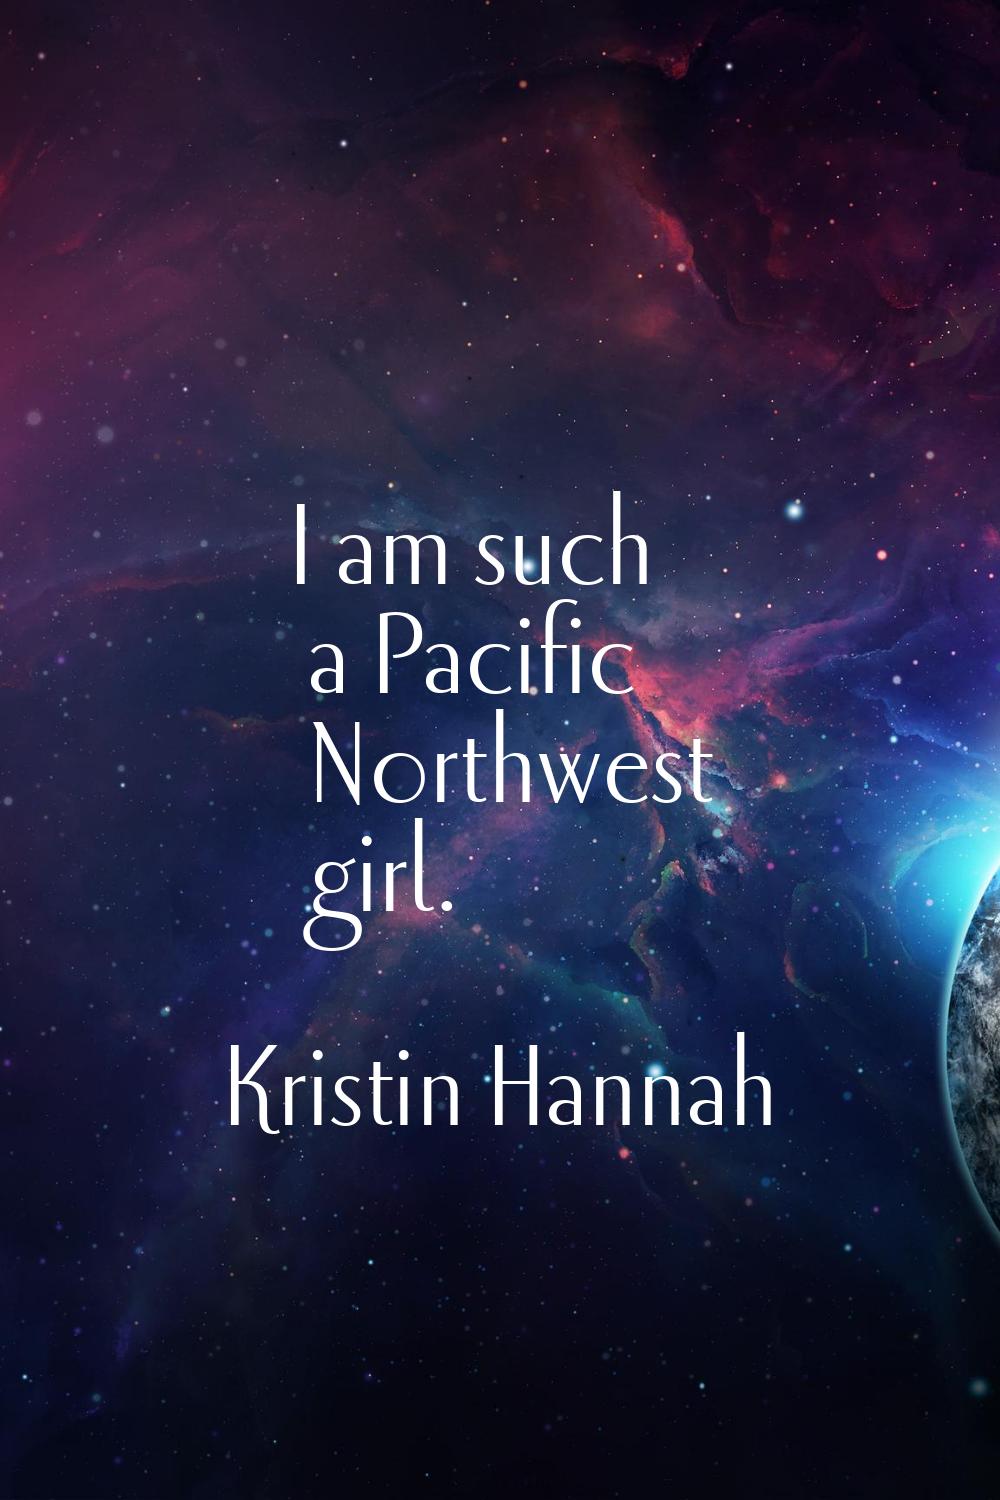 I am such a Pacific Northwest girl.